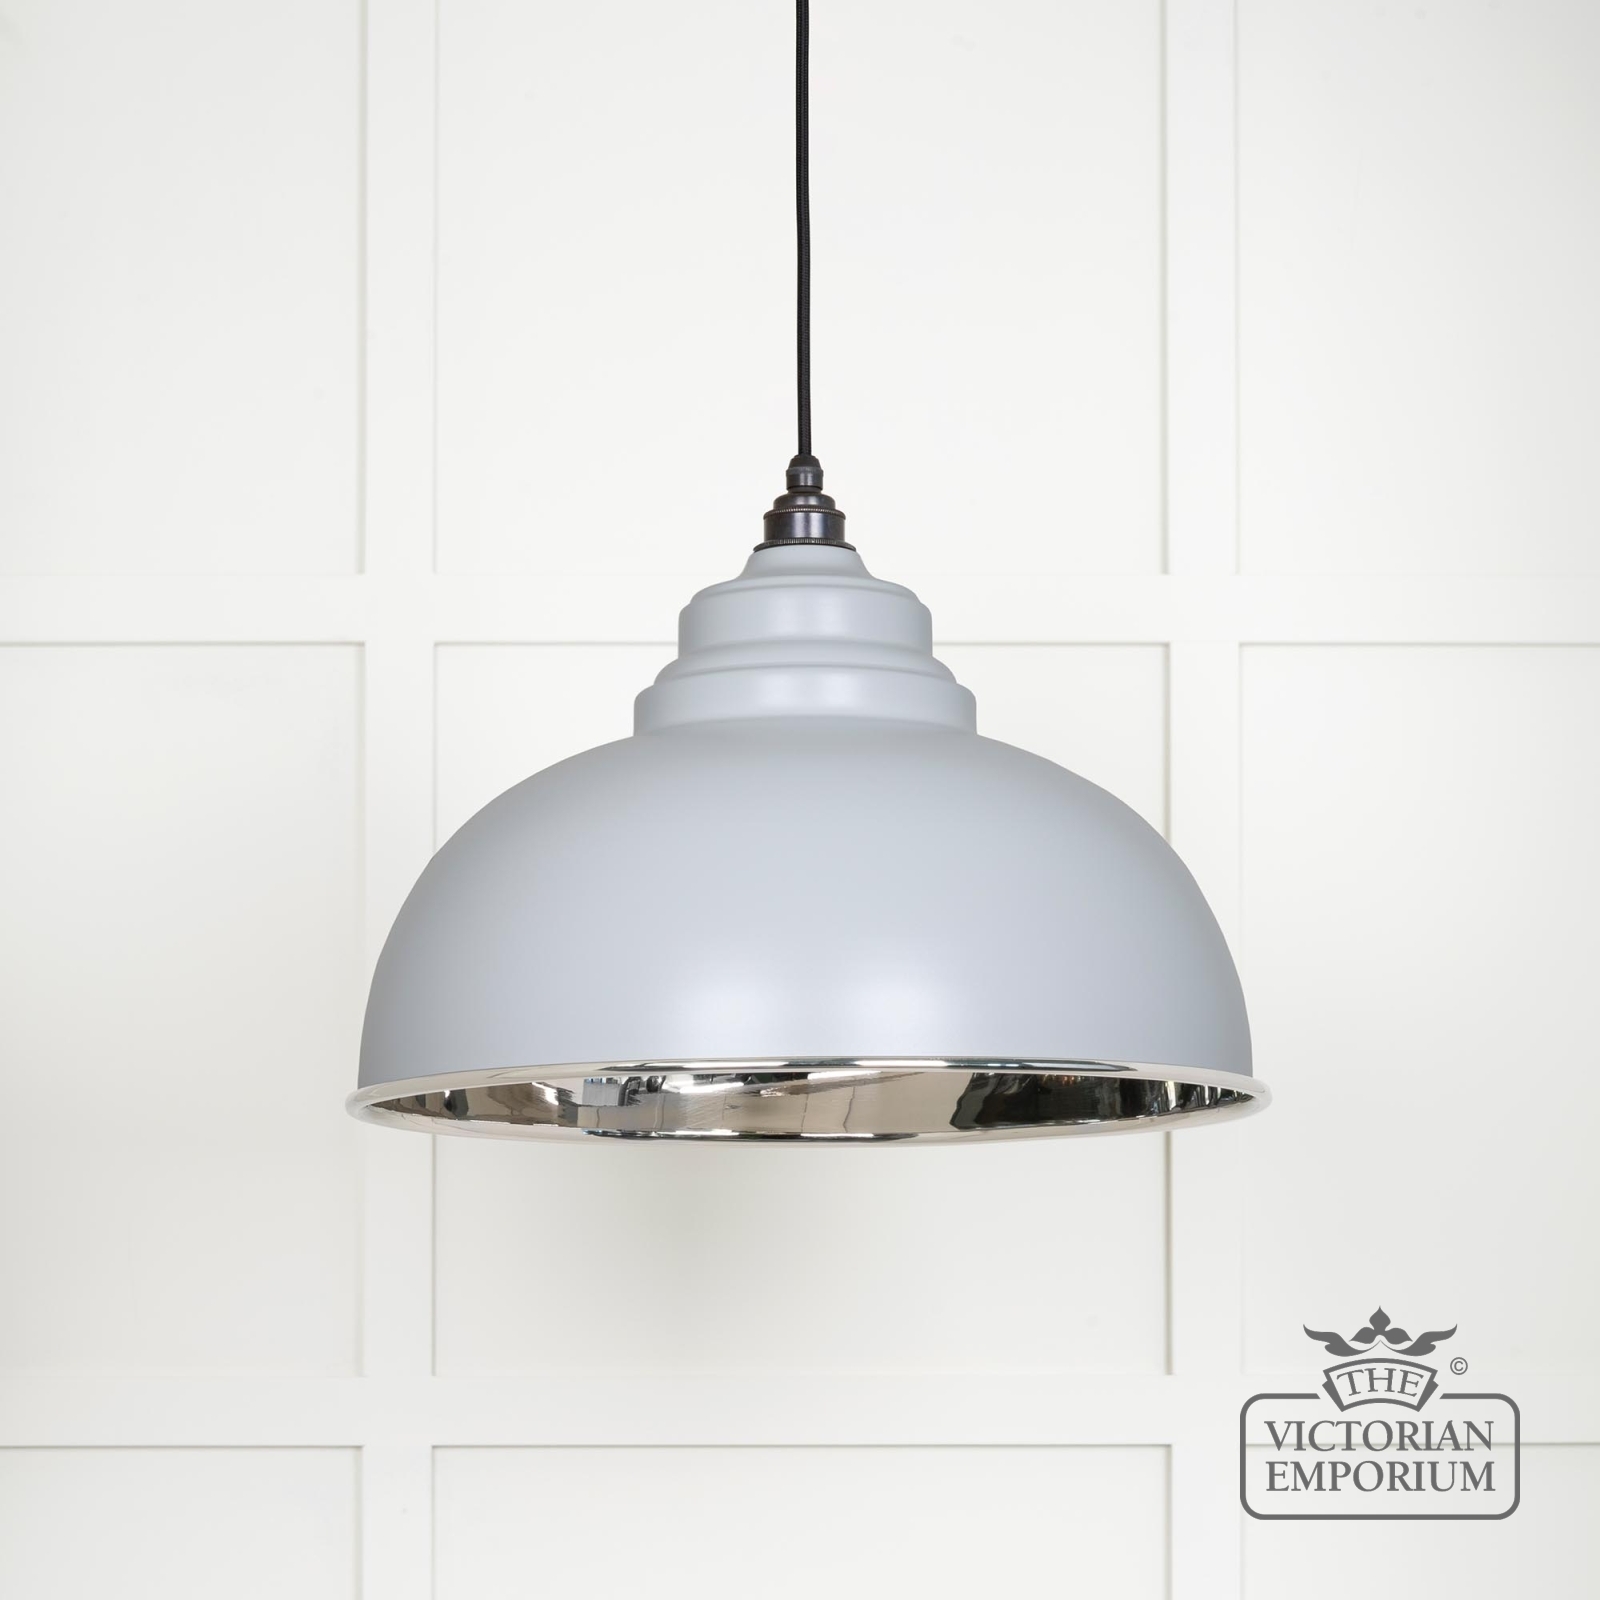 Harlow pendant light in smooth nickel with birch exterior